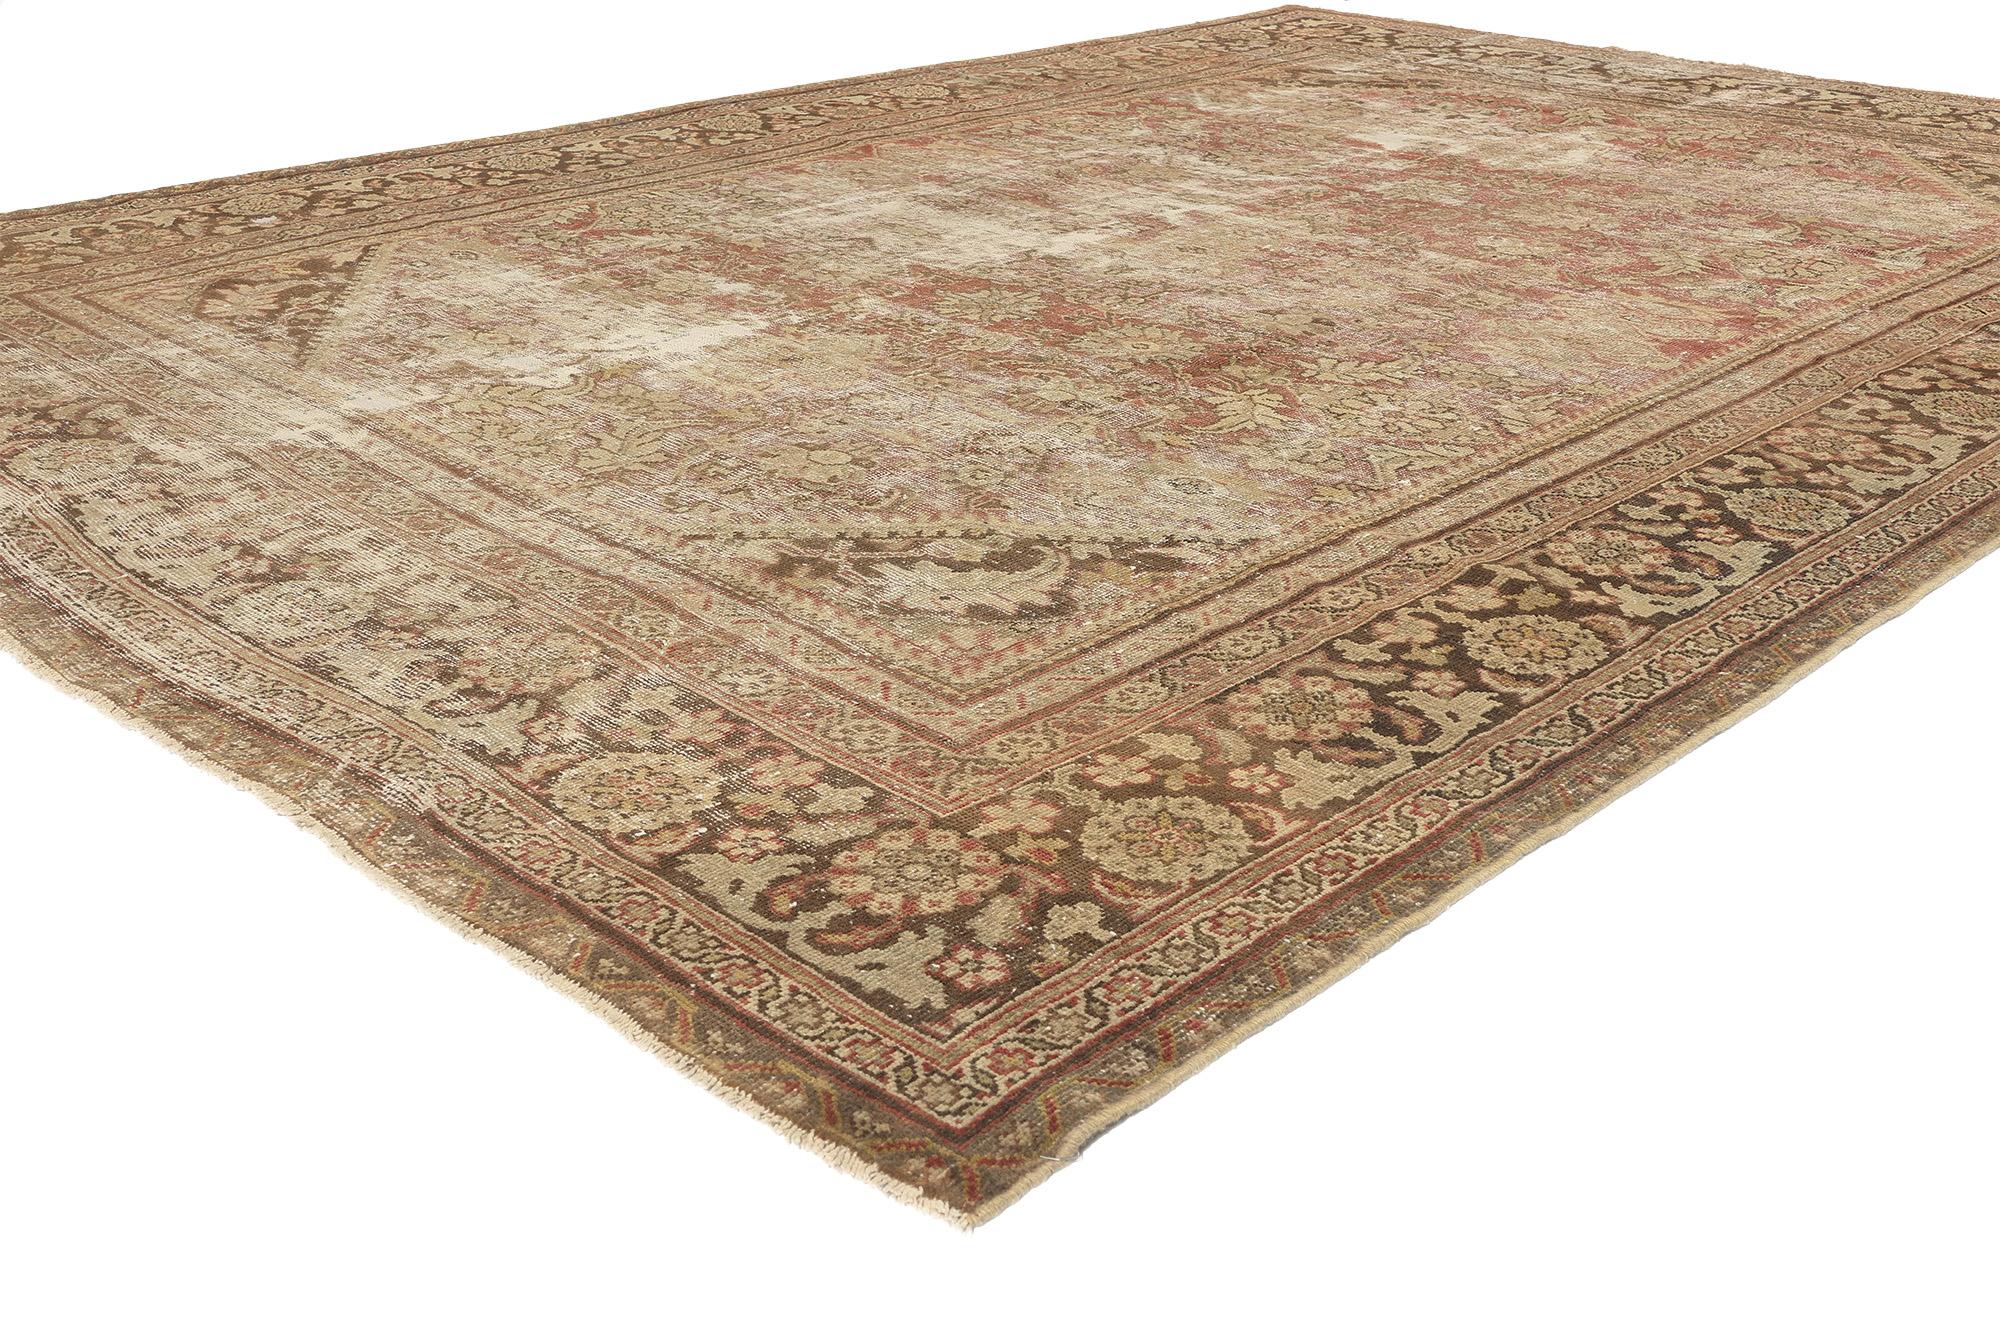 76822 Distressed Antique Persian Mahal Rug, 08'11 x 12'03. Distressed antique-washed Persian Mahal rugs are authentic pieces originating from the Mahallat region in central Northwestern Iran. These Mahal rugs undergo a specialized treatment process